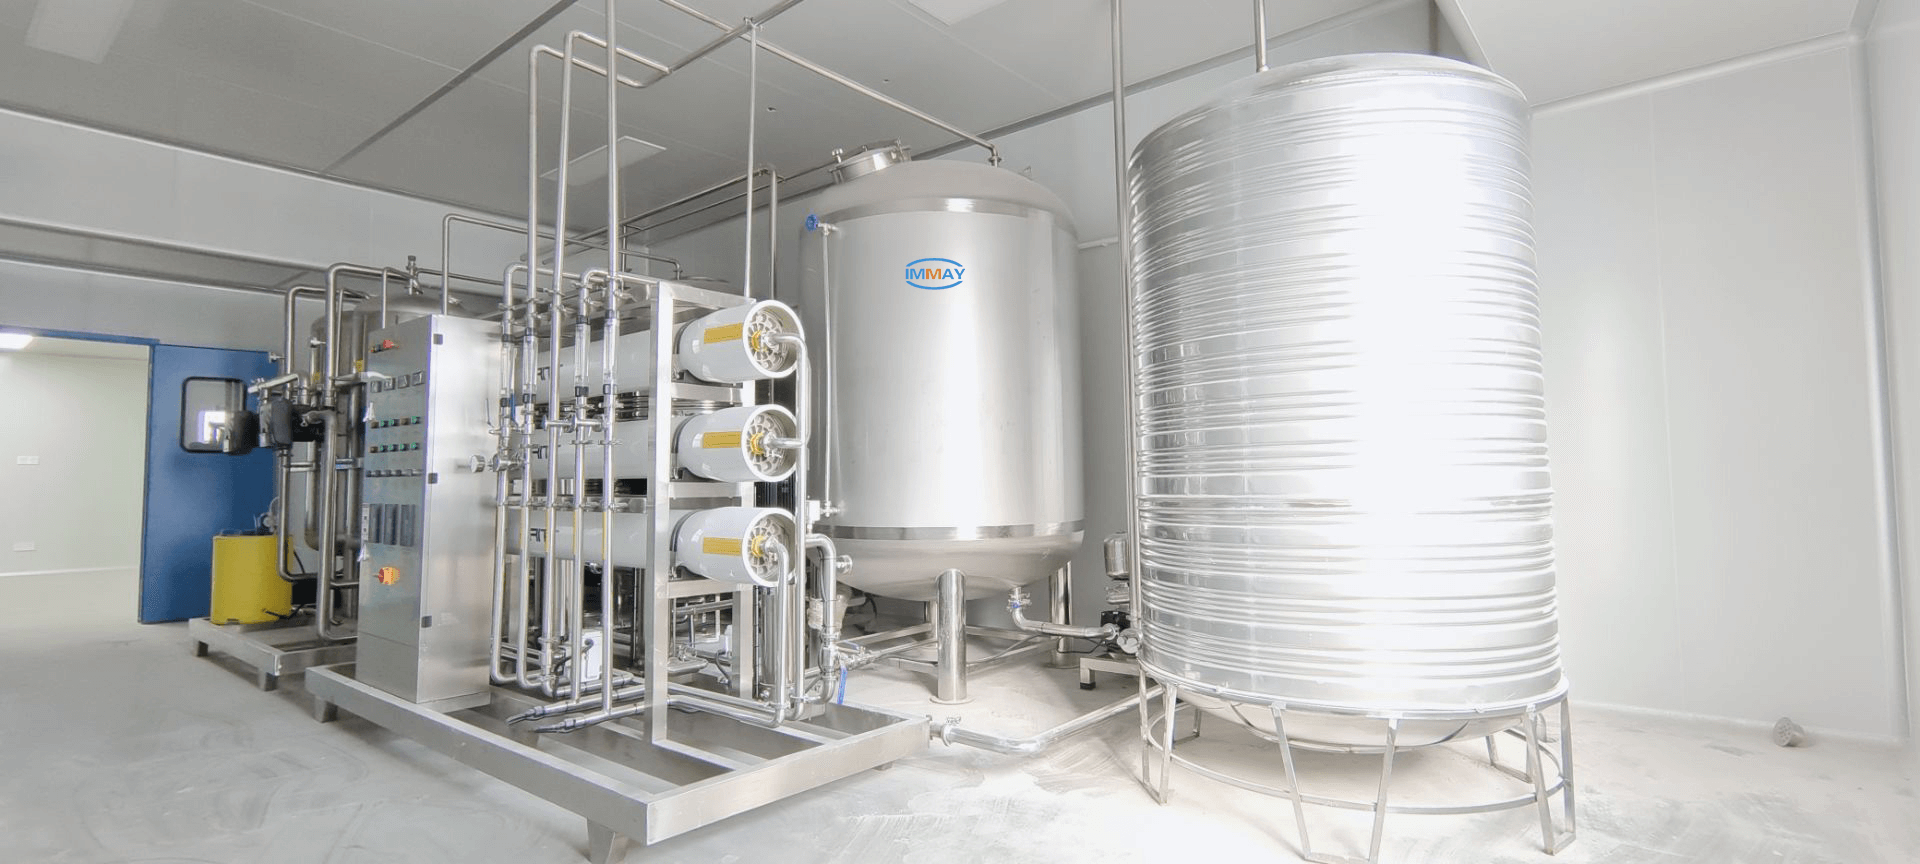 How Much Does Industrial Reverse Osmosis Water Treatment System Cost?